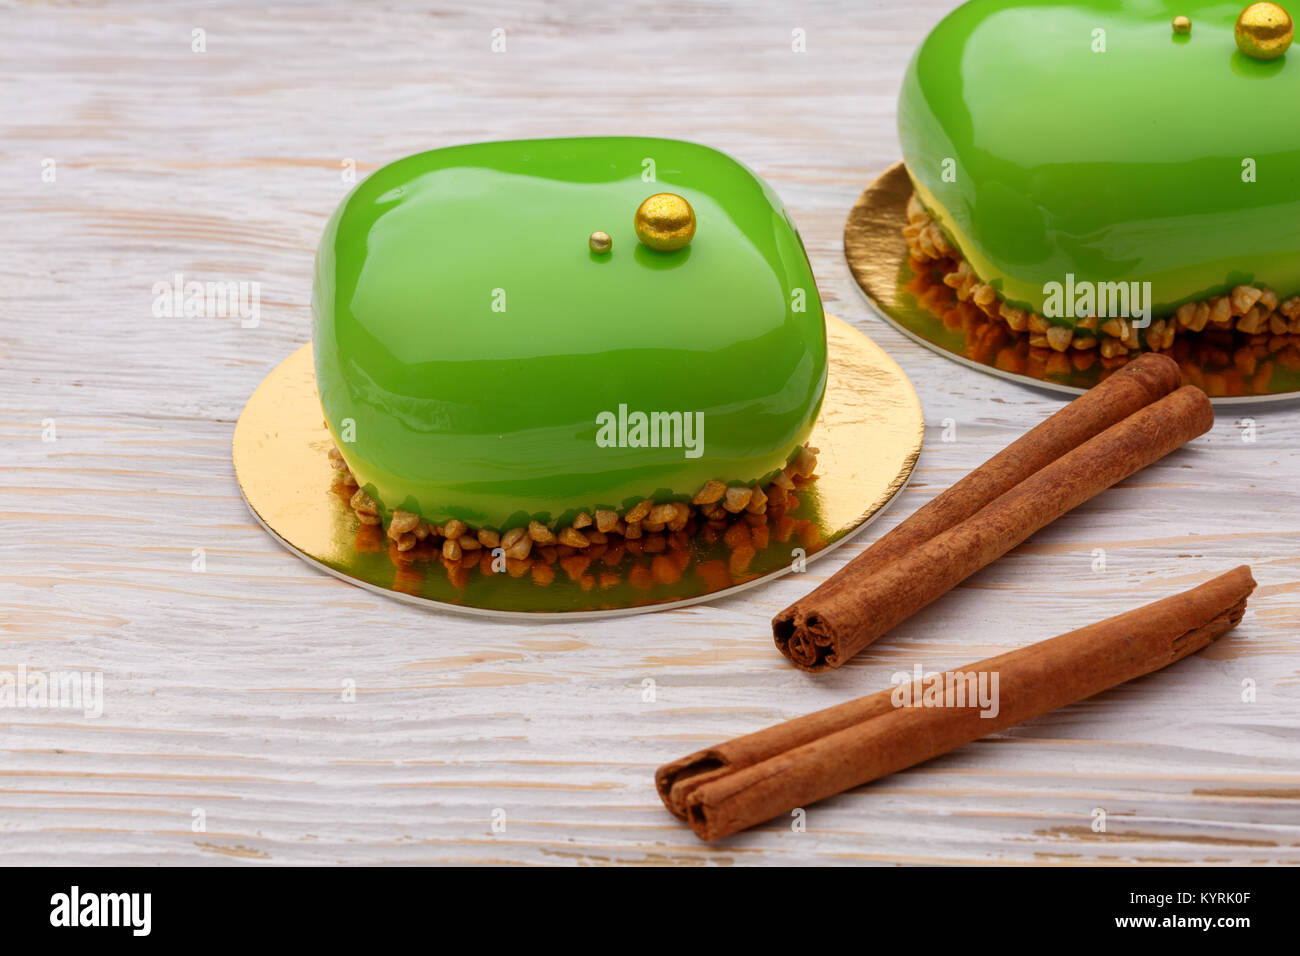 Green Mousse cakes with cinnamon sticks on wooden white background. A modern dessert Stock Photo